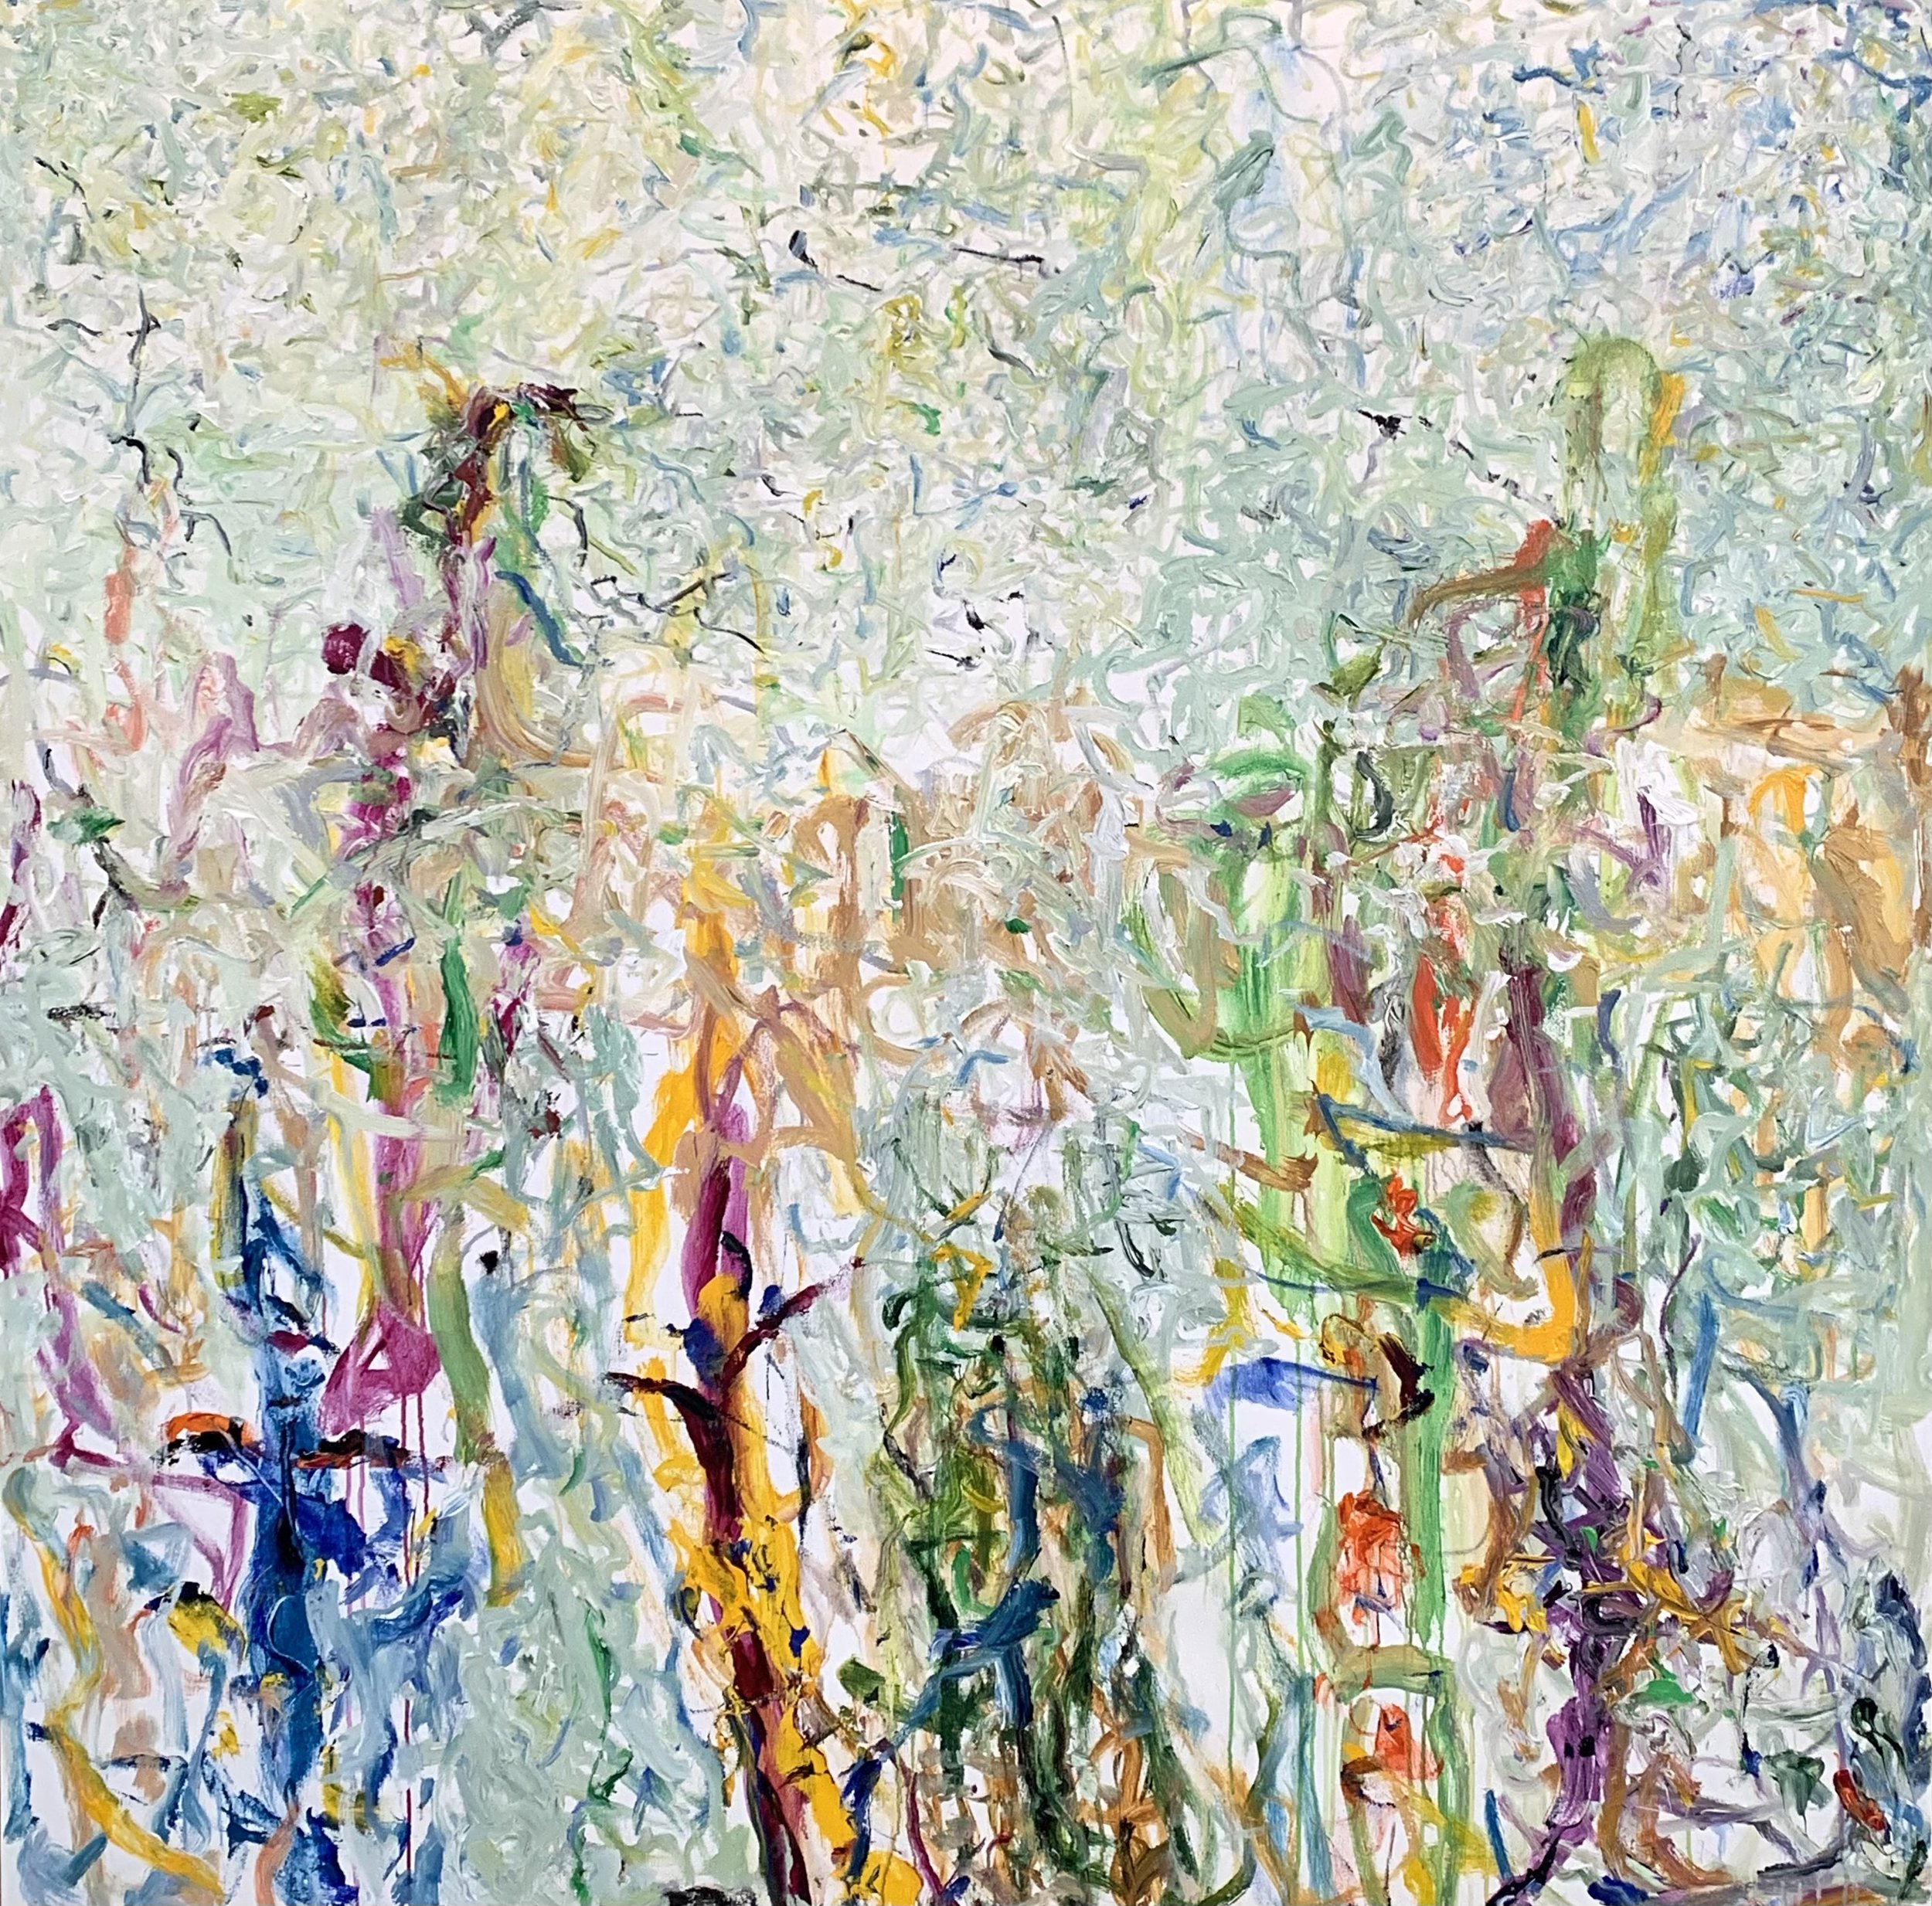 "Opening No. 206, Garden: Inside/Outside," 72"x72" acrylic on canvas